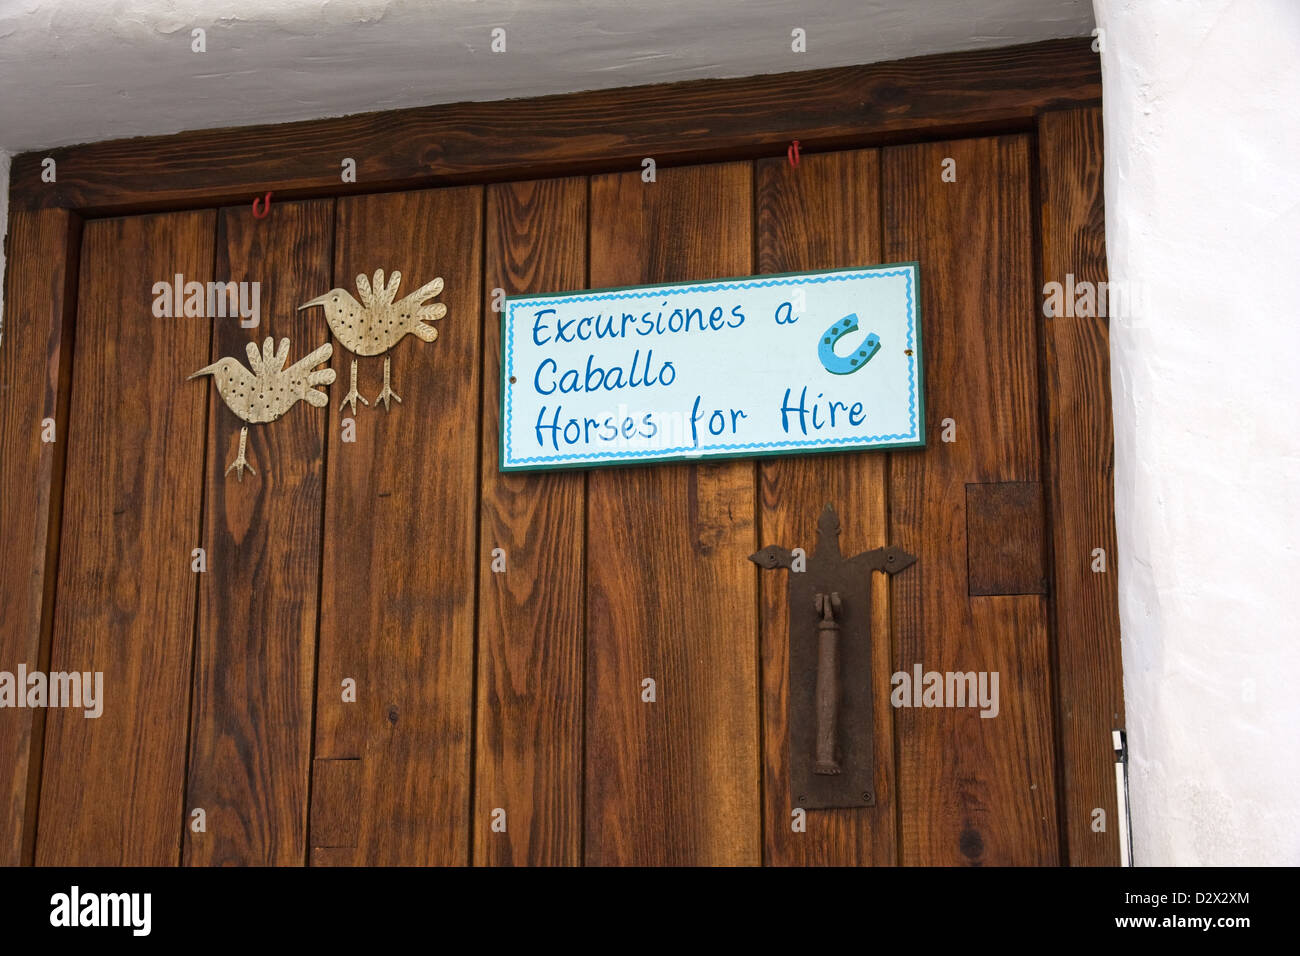 Sign for 'Excursiones a Caballo', Horses for hire, Frigiliana, Nerja, Andalucia, Spain Stock Photo